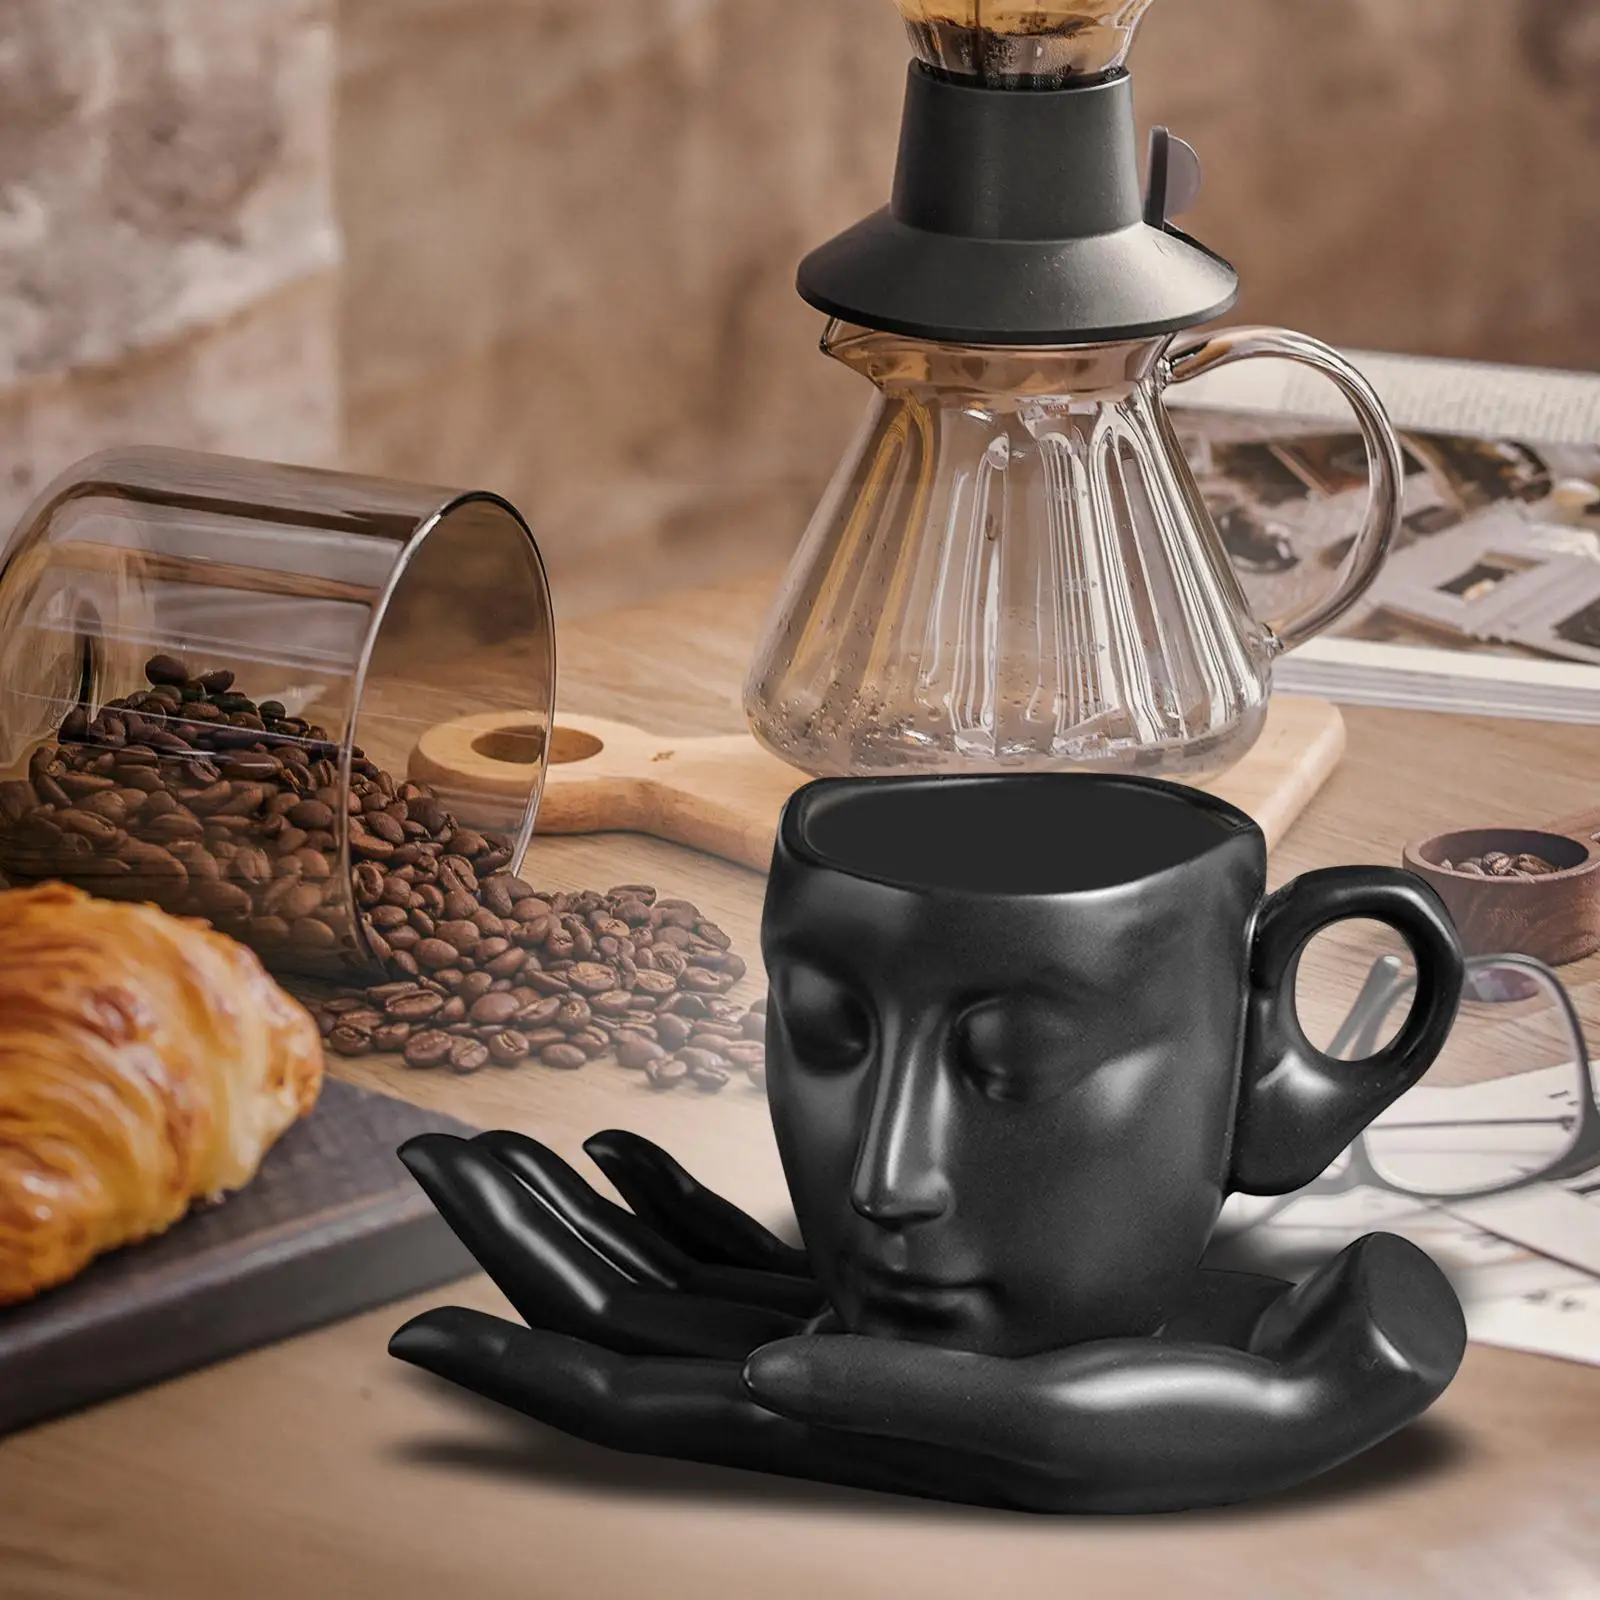 3D Human Face Mug Abstract Art Morning Cup Juice Water Cup Novelty 260ml for Tea Water Cappuccino Housewarming Anniversary